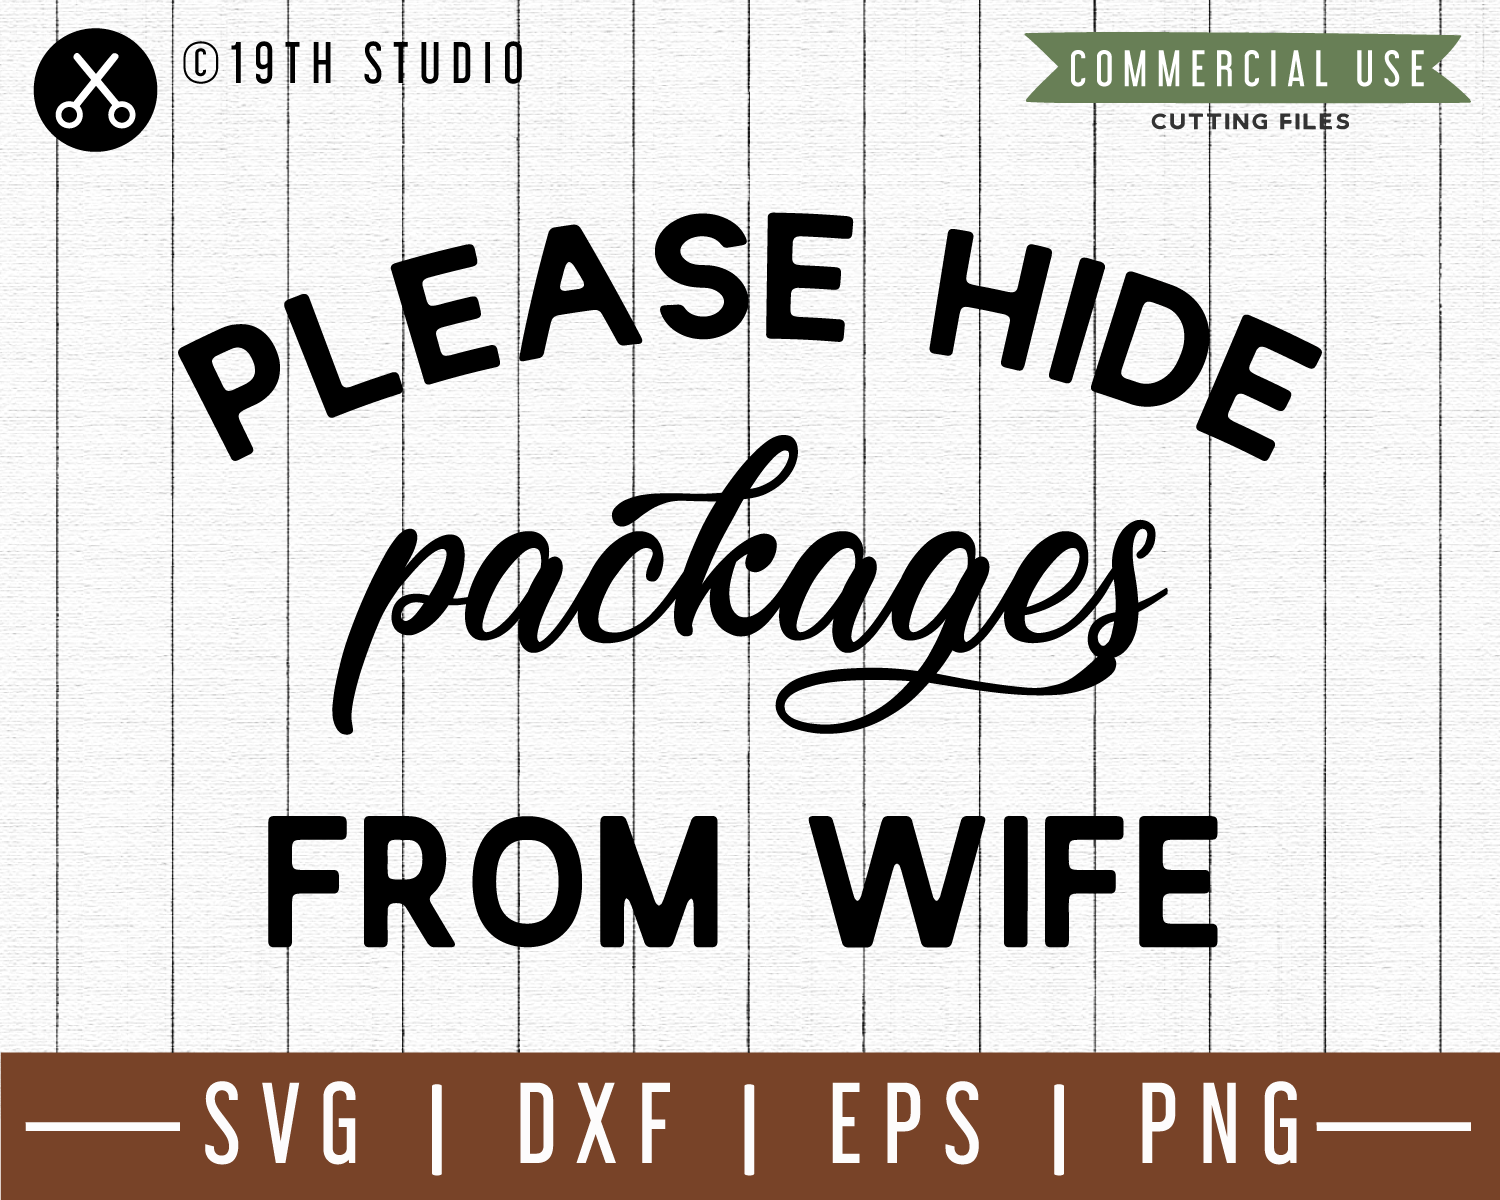 Please hide packages from wife SVG |M49F| A Doormat SVG file Craft House SVG - SVG files for Cricut and Silhouette